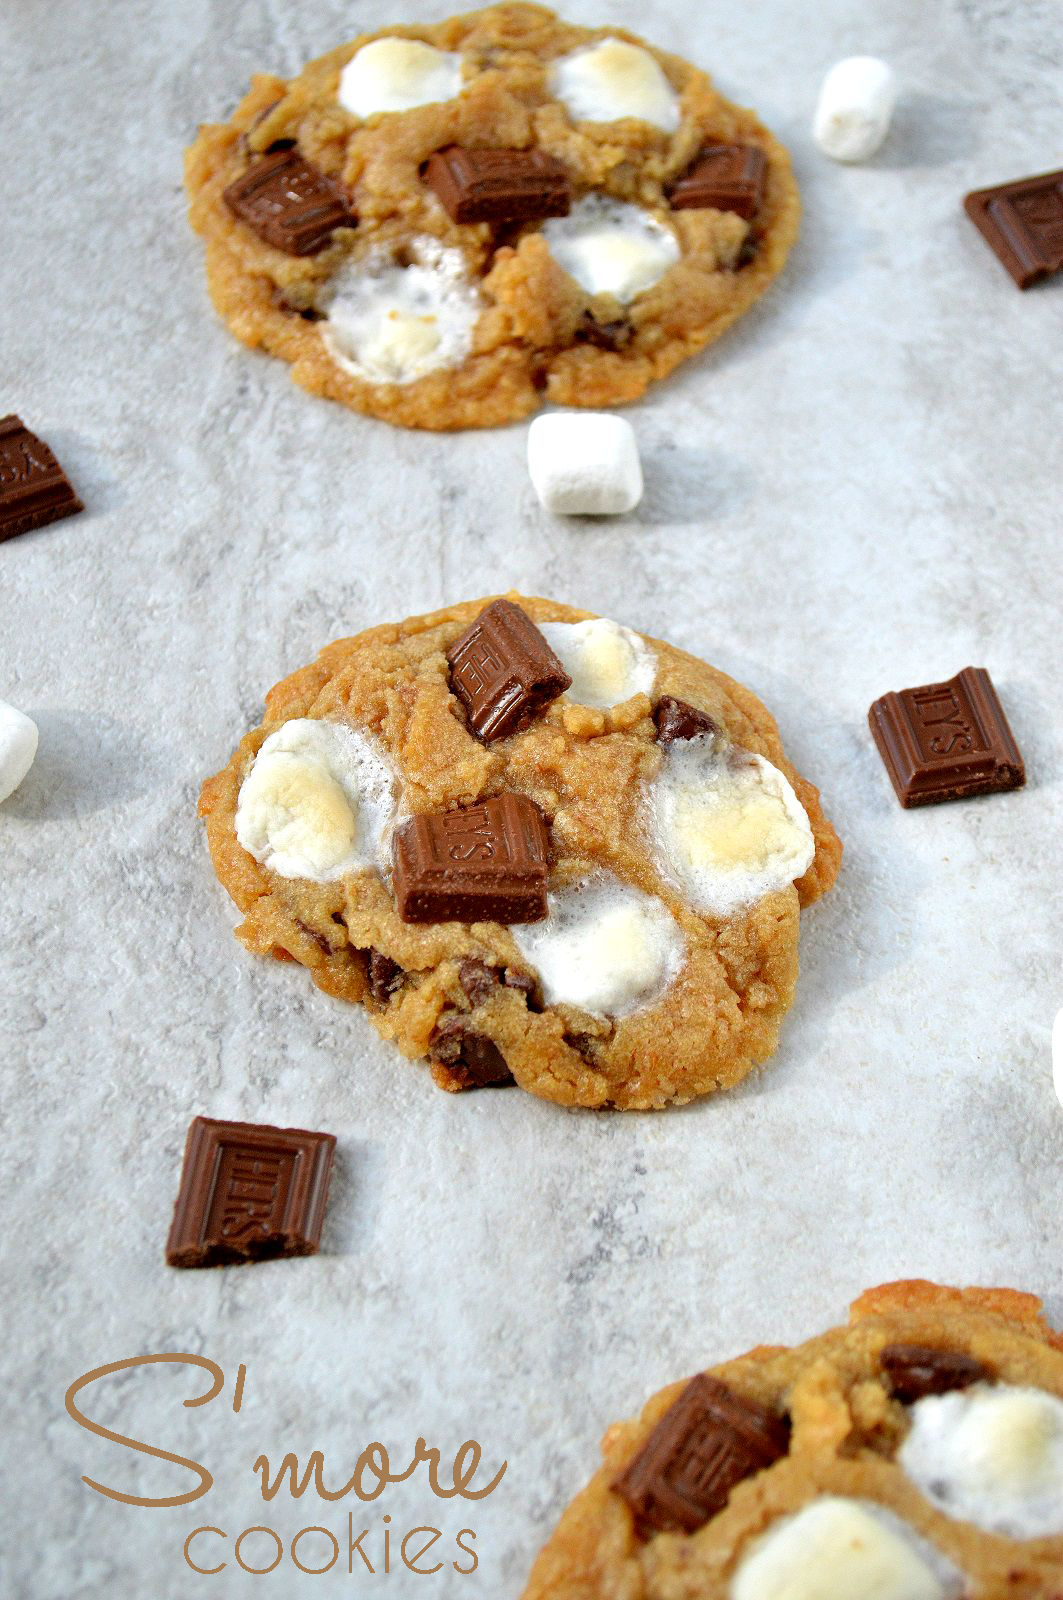 S'mores Cookie Recipe + Ice Cream Sandwiches: the perfect summertime treat